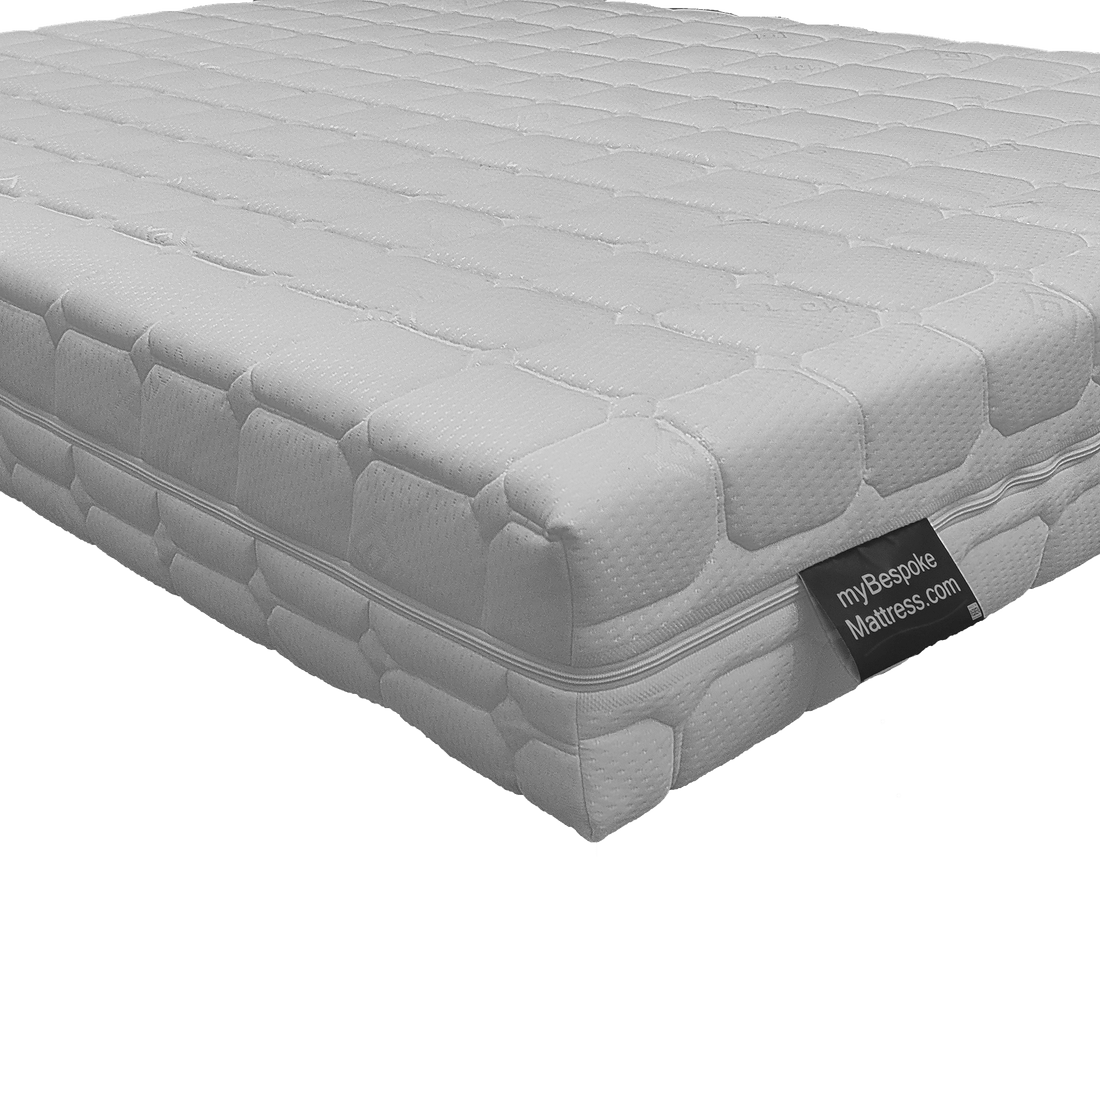 Made-to-Measure Mattresses: Finding the Perfect Fit for Your Sleeping Space - MyBespokeMattress.com